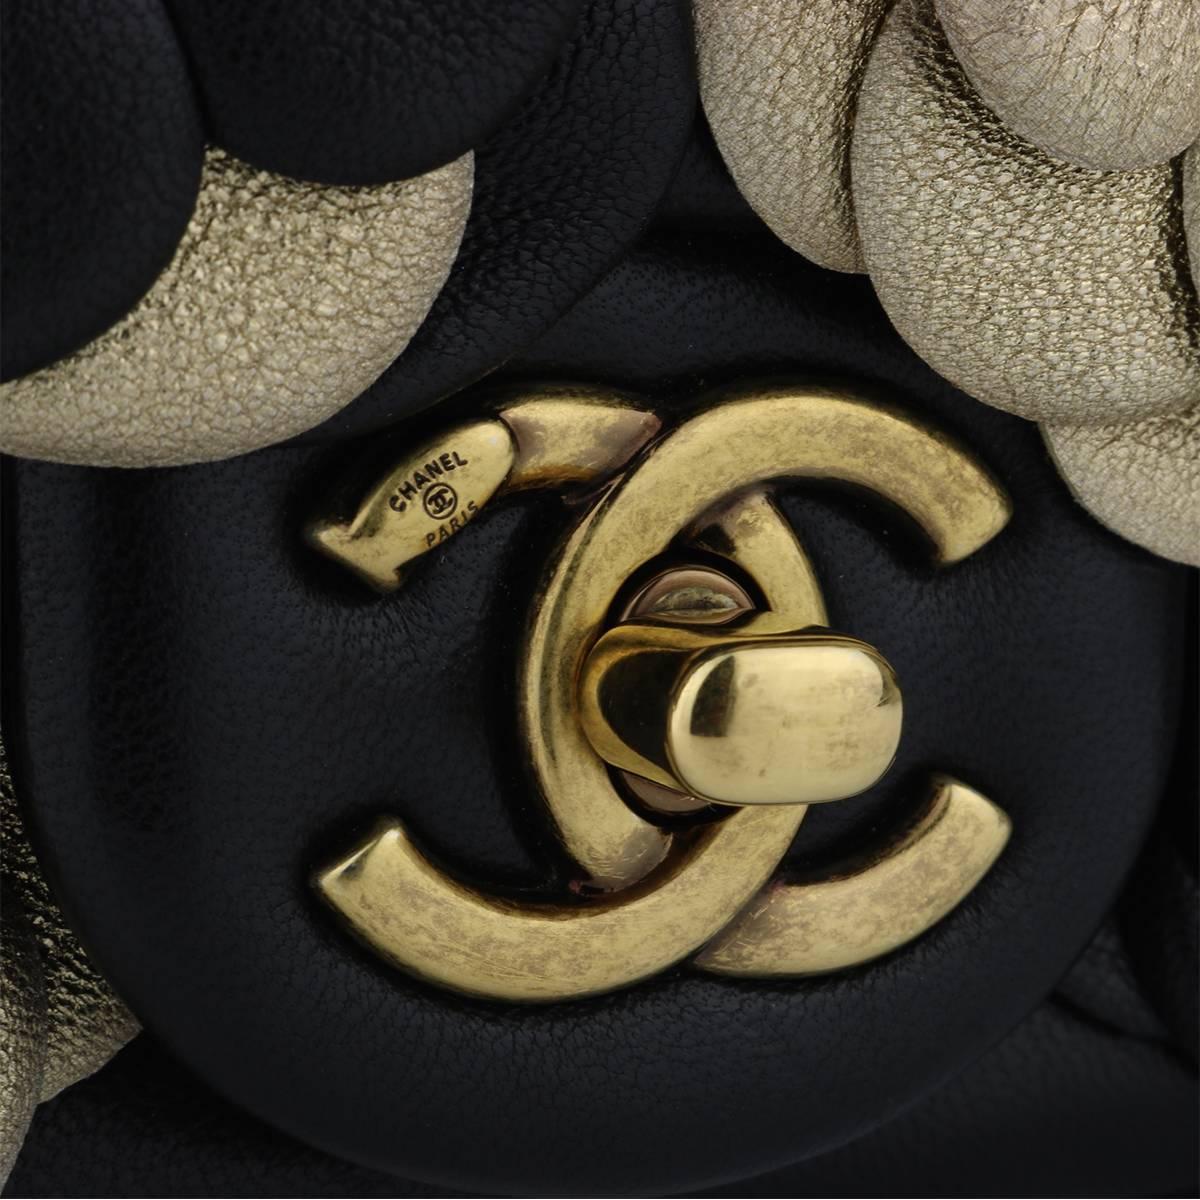 Authentic CHANEL Camellia Mini Black/Gold Lambskin with Antique Gold Hardware 2015 Limited Edition

This stunning bag is in a mint condition, the bag still holds the original shape, and the hardware is still very shiny.

Exterior Condition: Mint